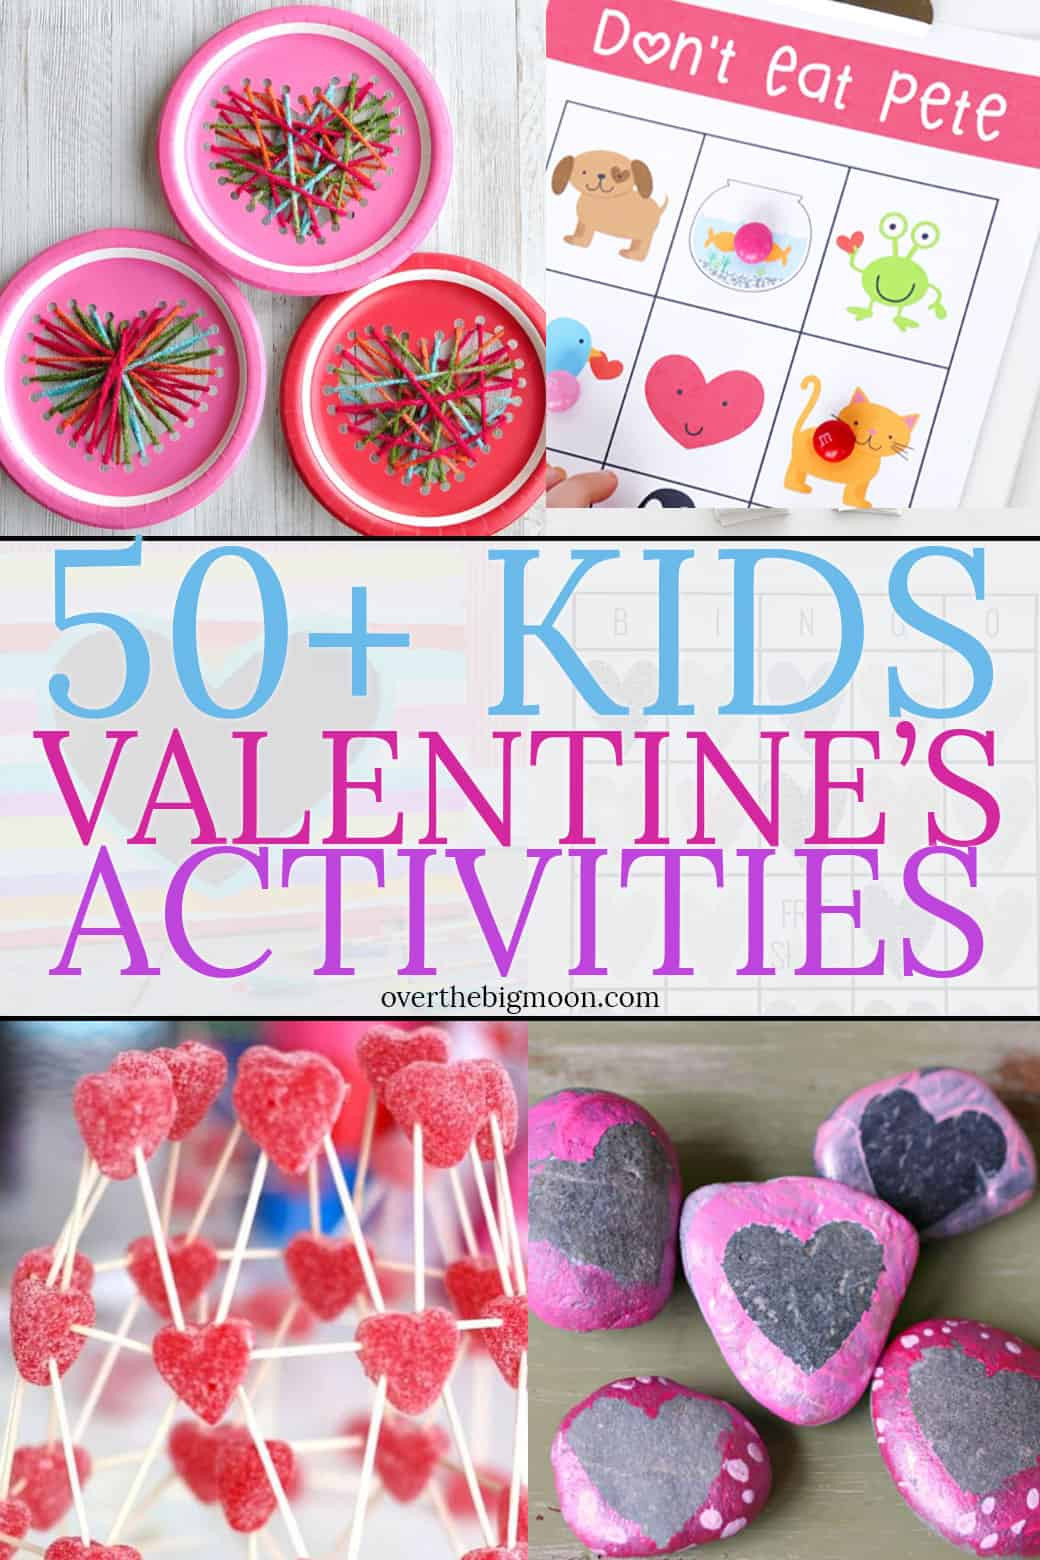 Valentines Day Activities For Toddlers
 50 Valentine s Day Activities for Kids Over the Big Moon